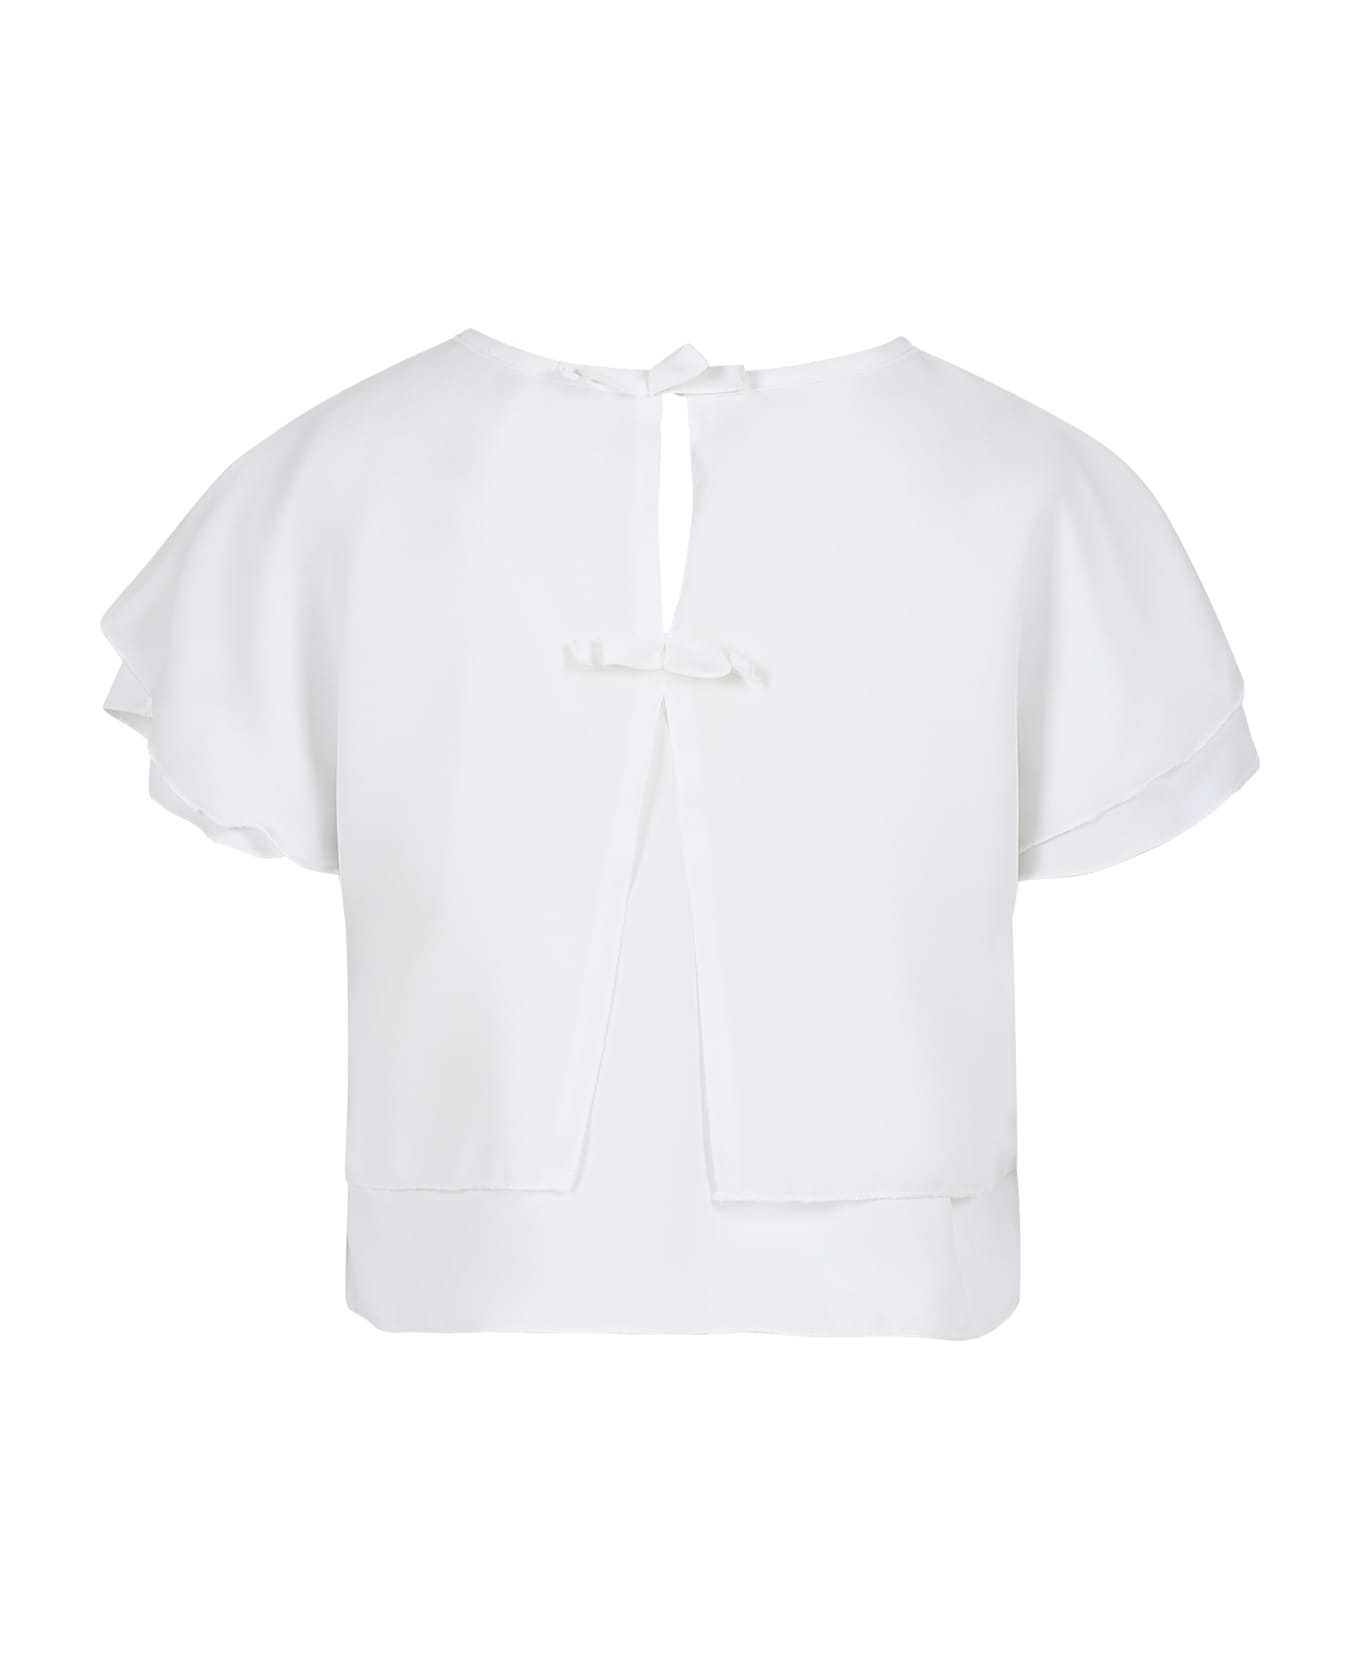 Monnalisa White Top For Girl With Bows - White トップス